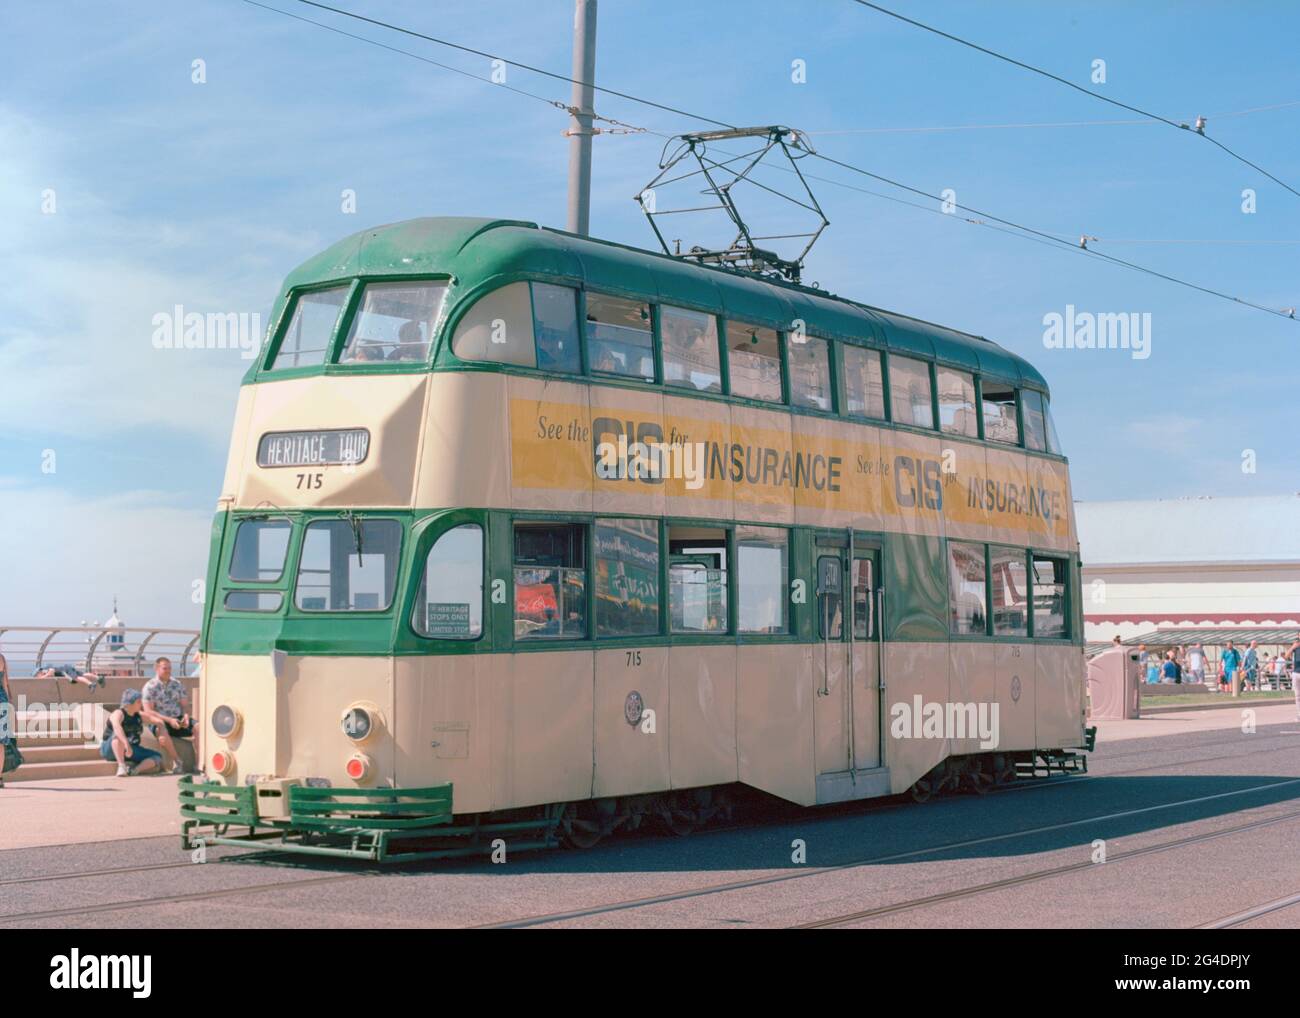 Blackpool, UK - 31 May 2021: A heritage double decker tram at the seafront for heritage tram tours. Stock Photo